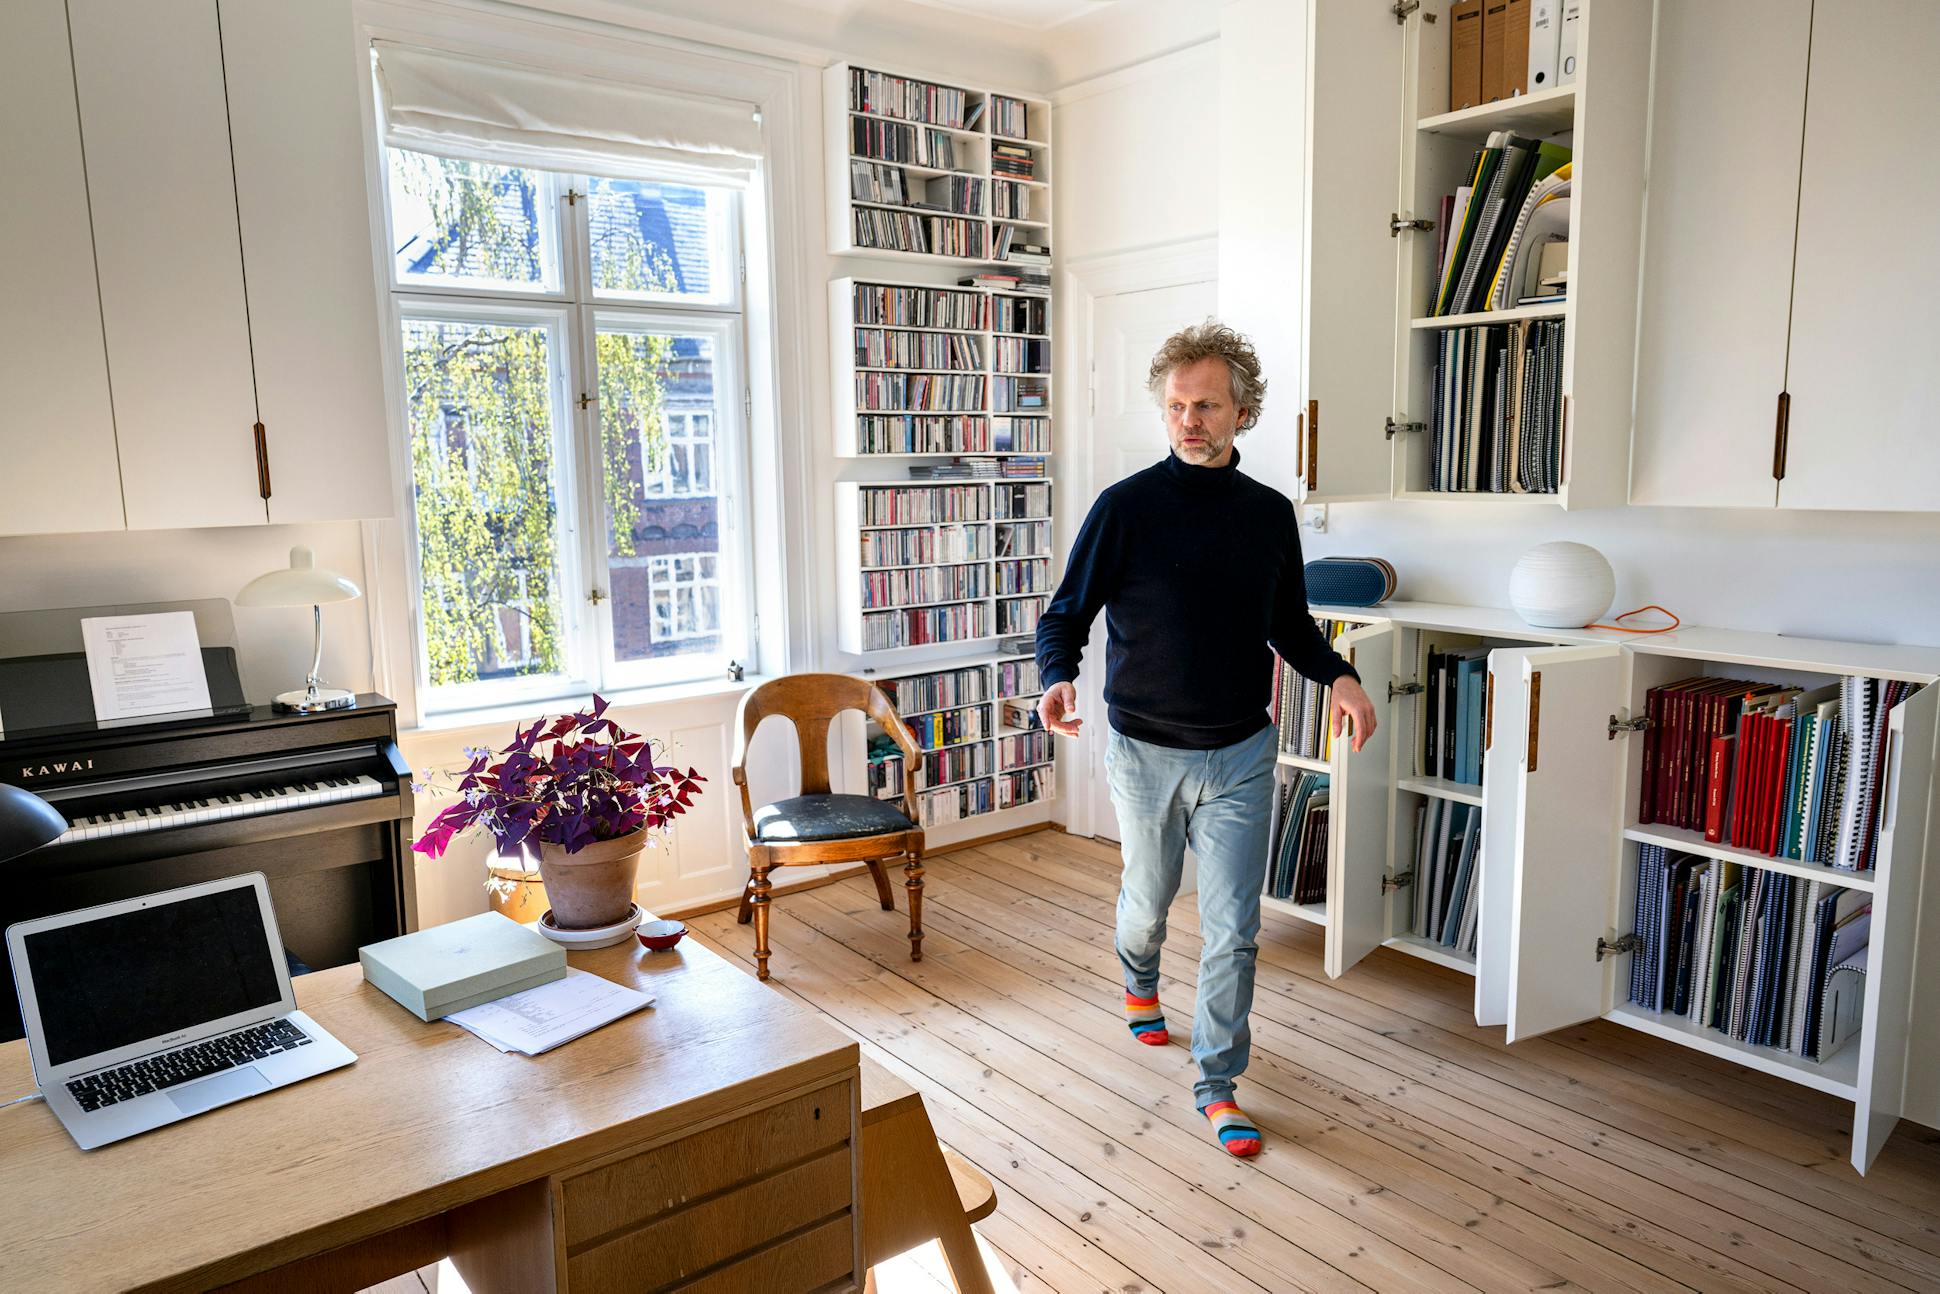 The bright, neat study in Thomas Søndergård's Copenhagen home is filled with scores. “He really is a workhorse, that one,” said Andreas Landin, his husband, an opera singer. “He works and works and works.”